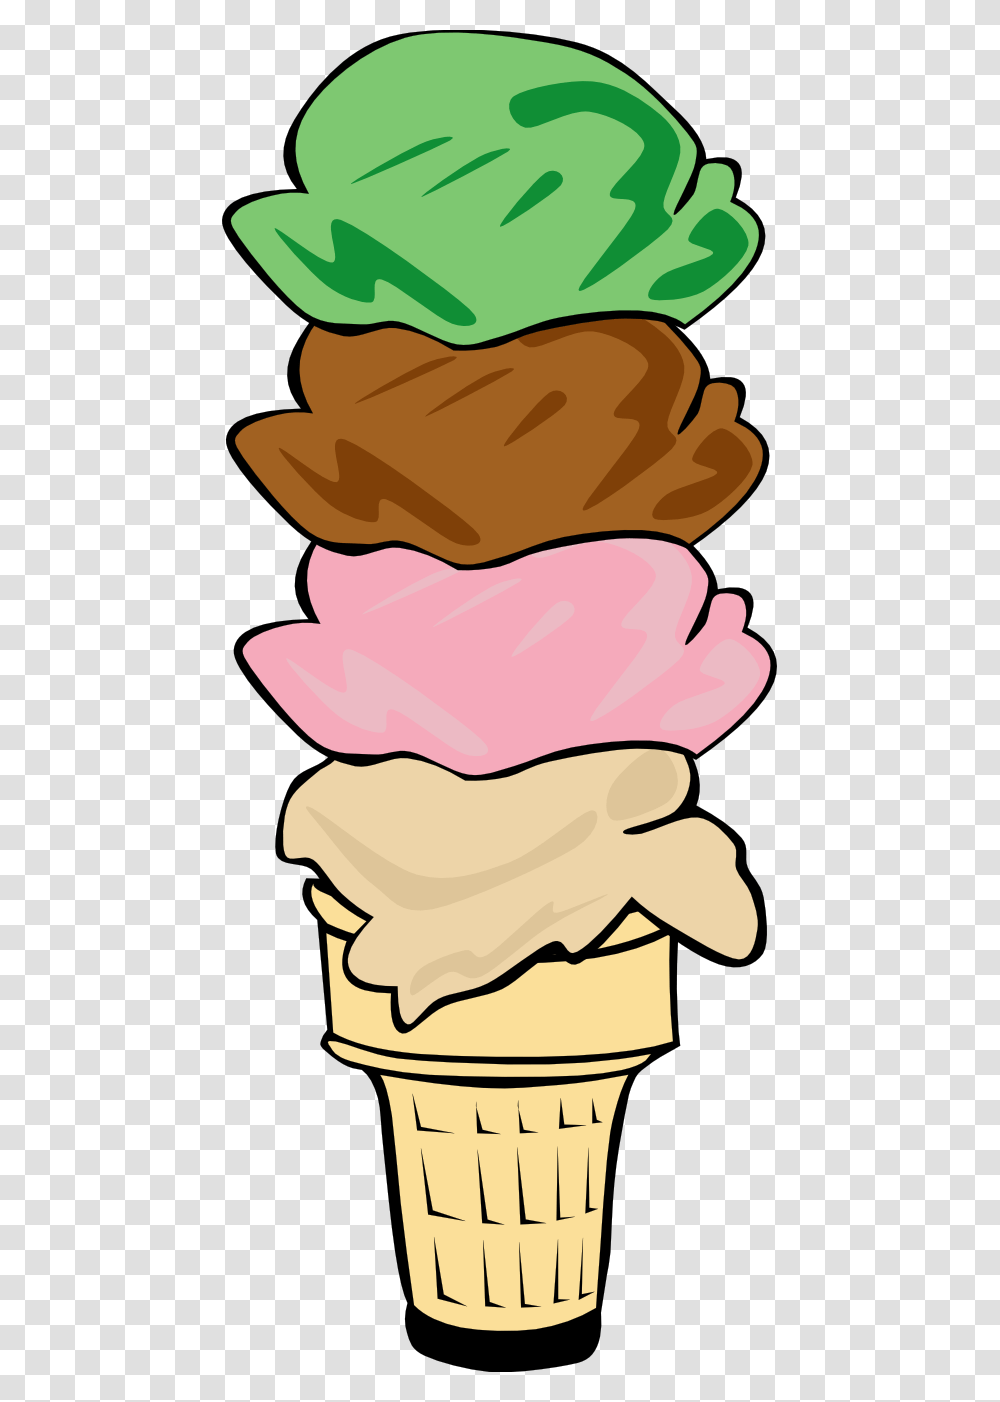 Free Pictures Of An Ice Cream Cone, Sweets, Food, Confectionery, Dessert Transparent Png